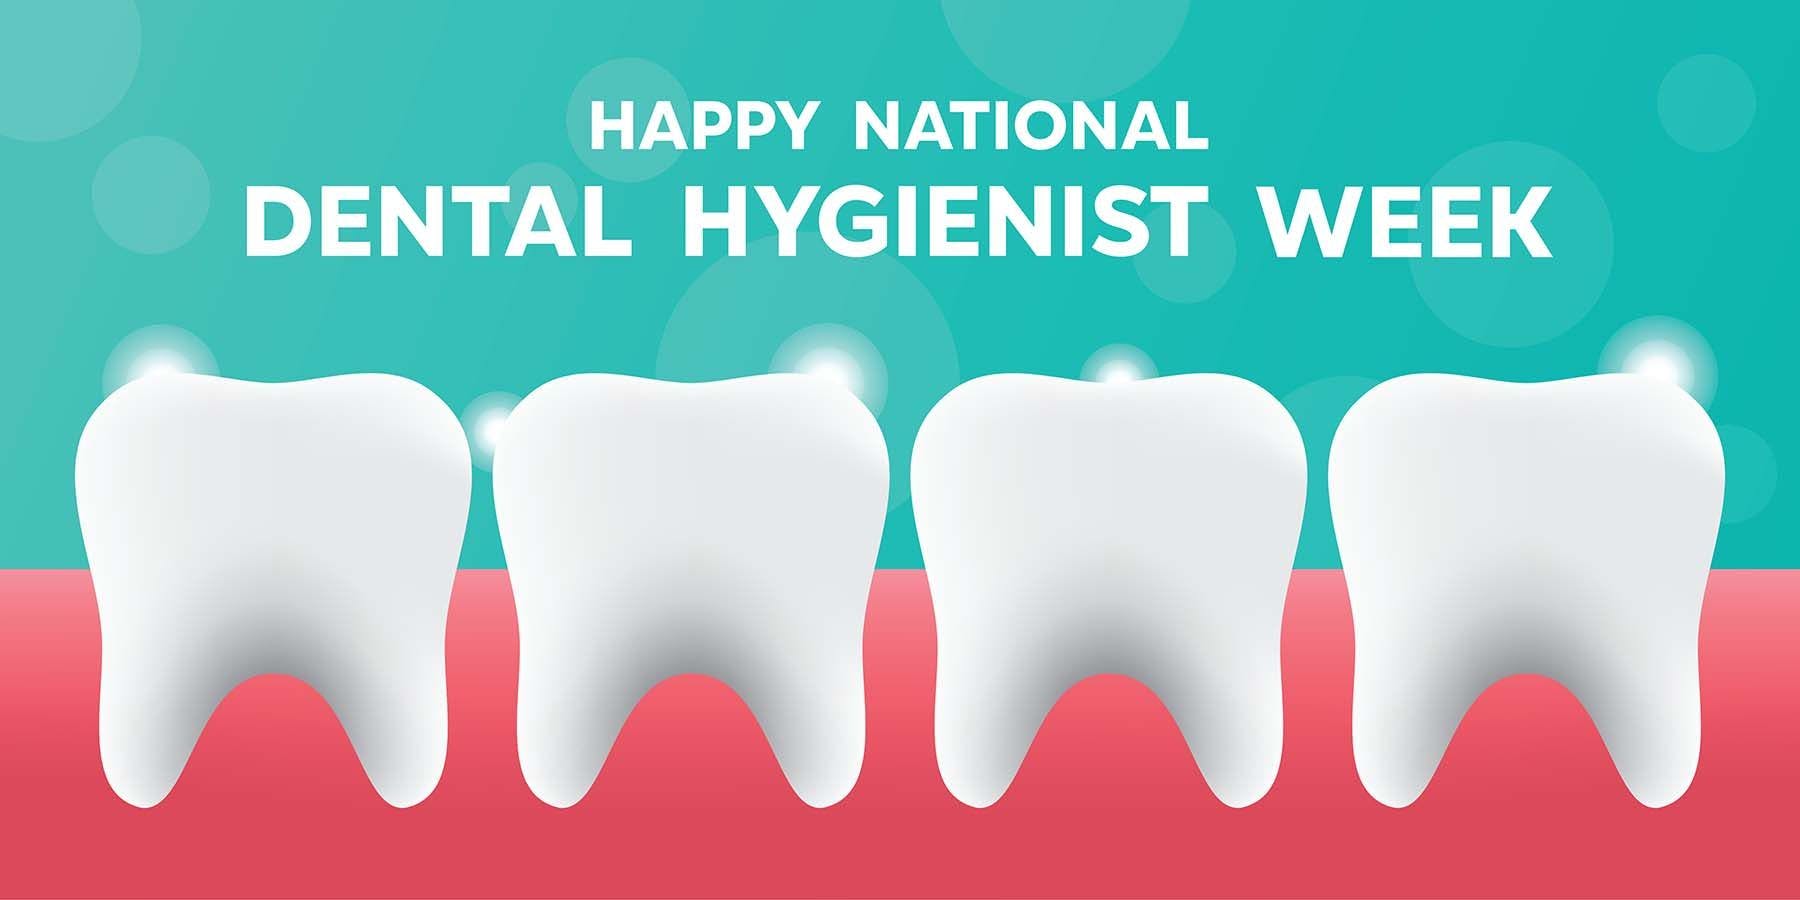 National Dental Hygienists Week Reminds Us to Appreciate All the Great Care Provided | Image Credit: © Juandy - stock.adobe.com